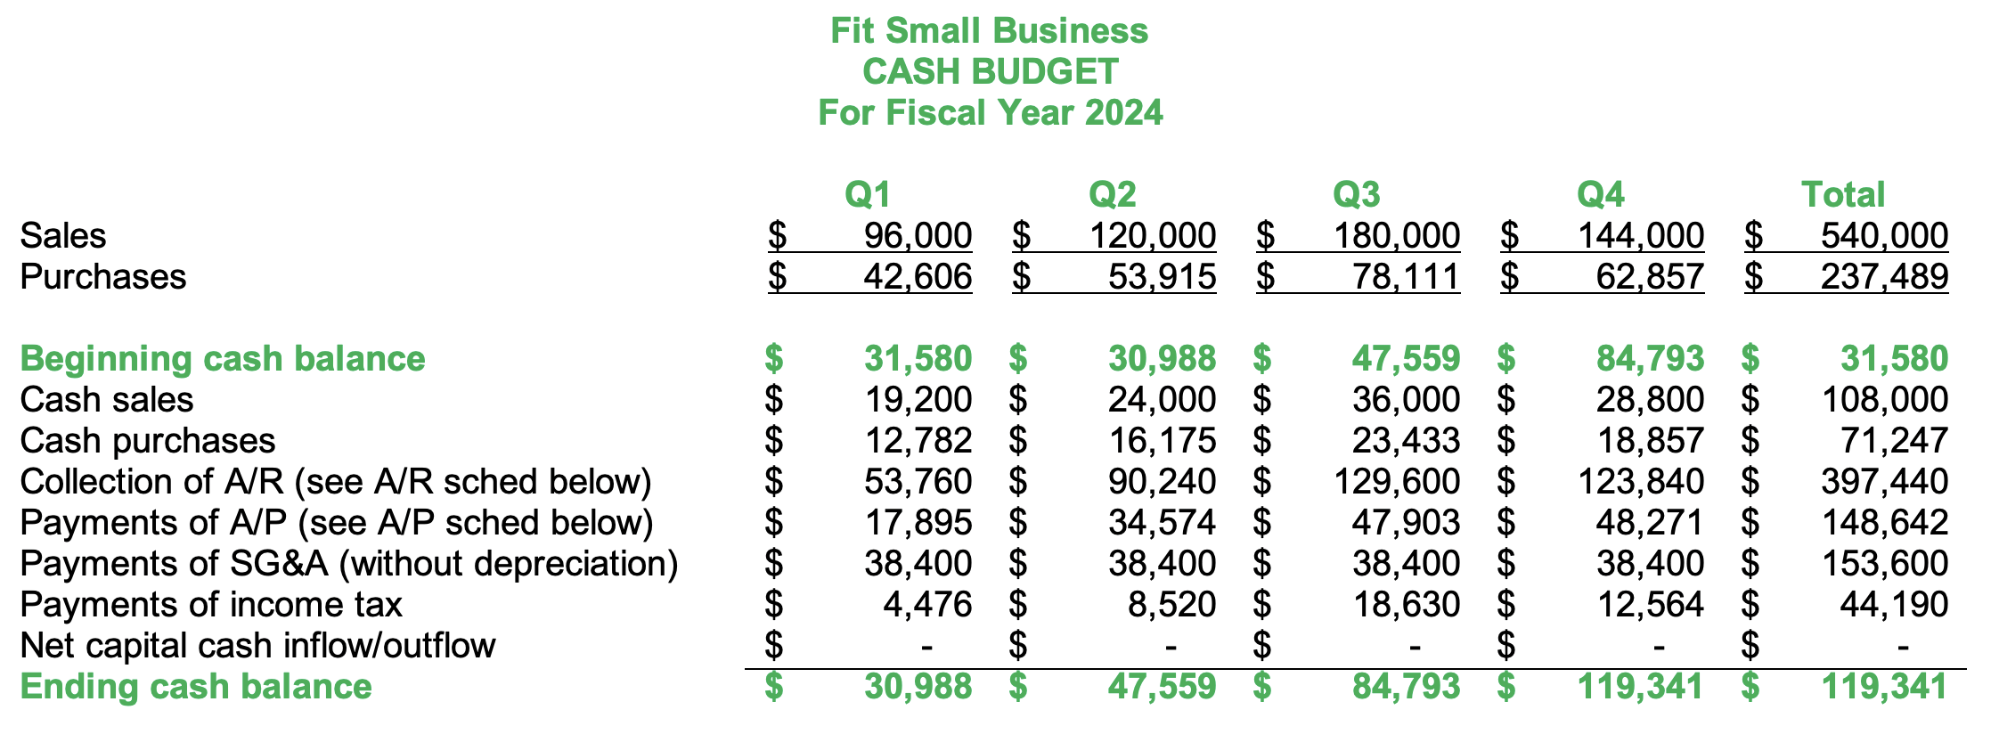 Image showing the cash budget